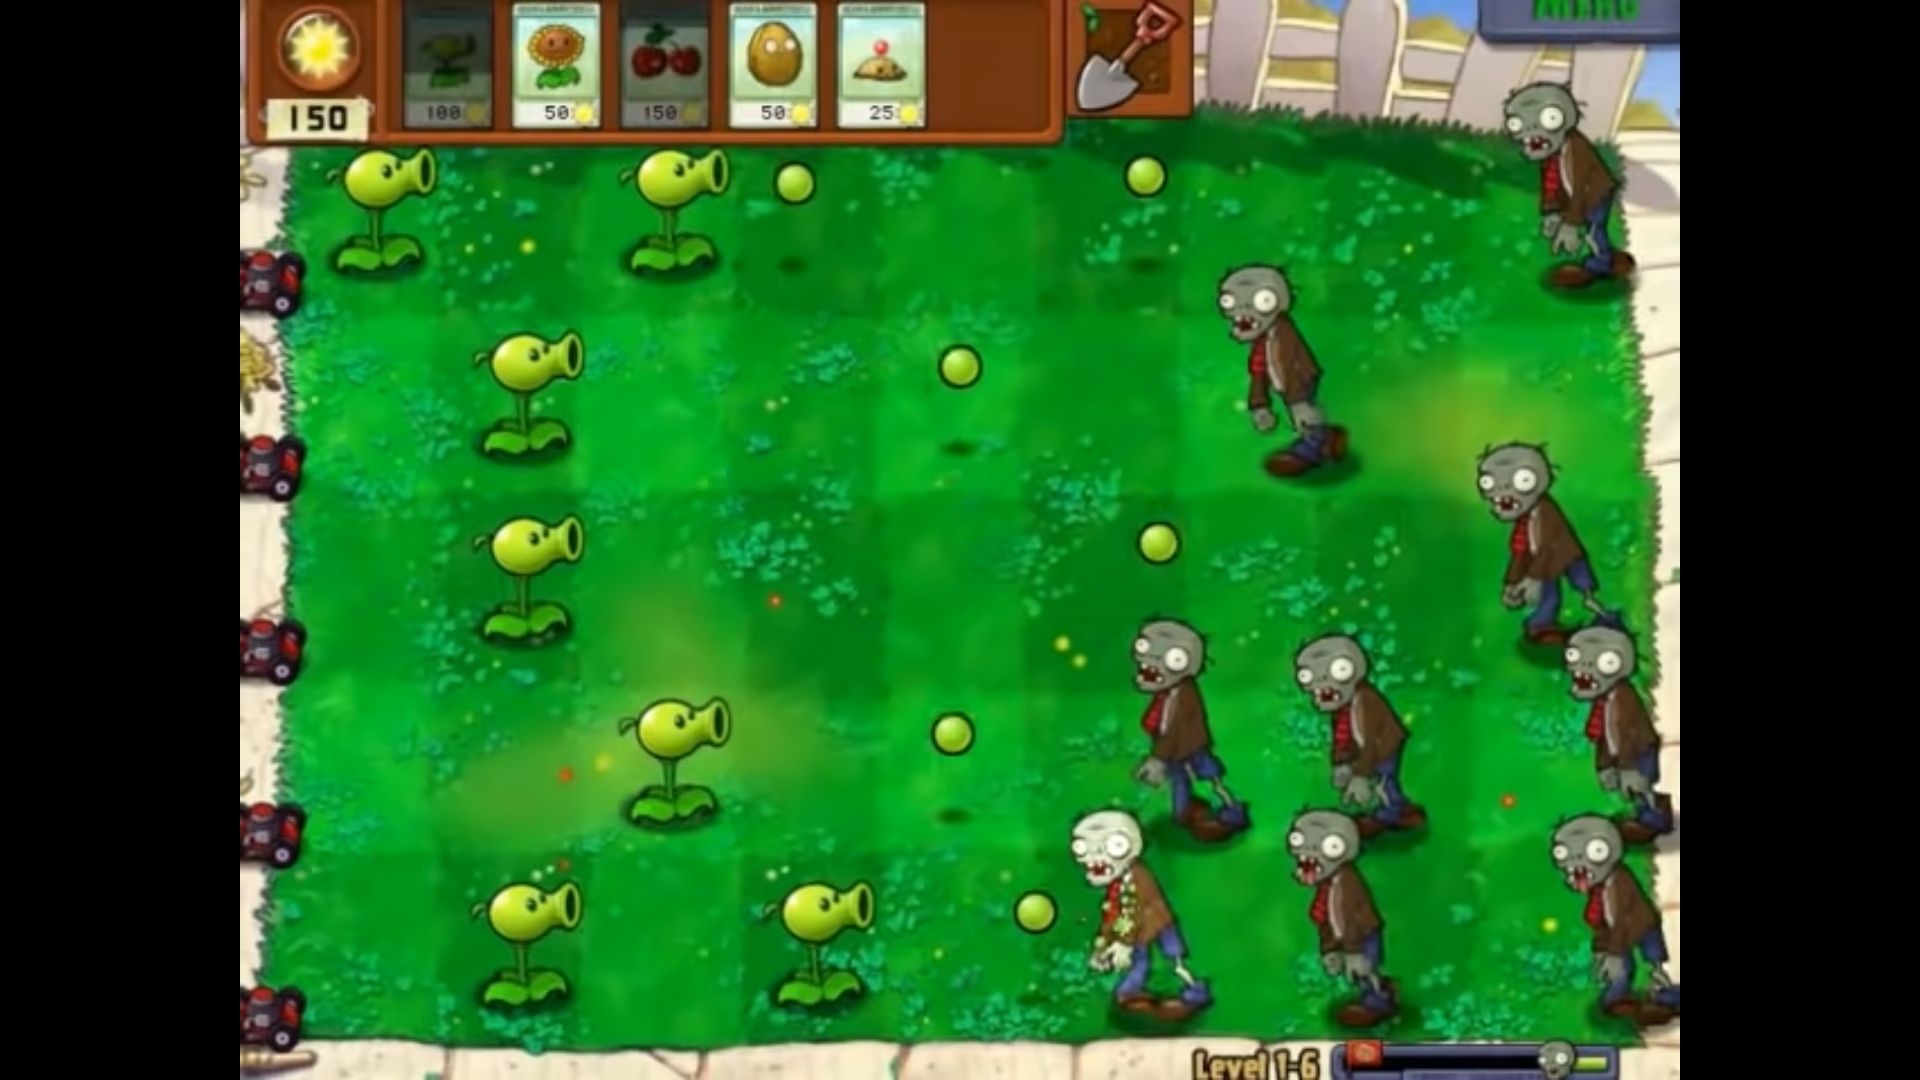 Addictive games - Plants vs Zombies. A screenshot shows Peashooters shooting at zombies in the garden.